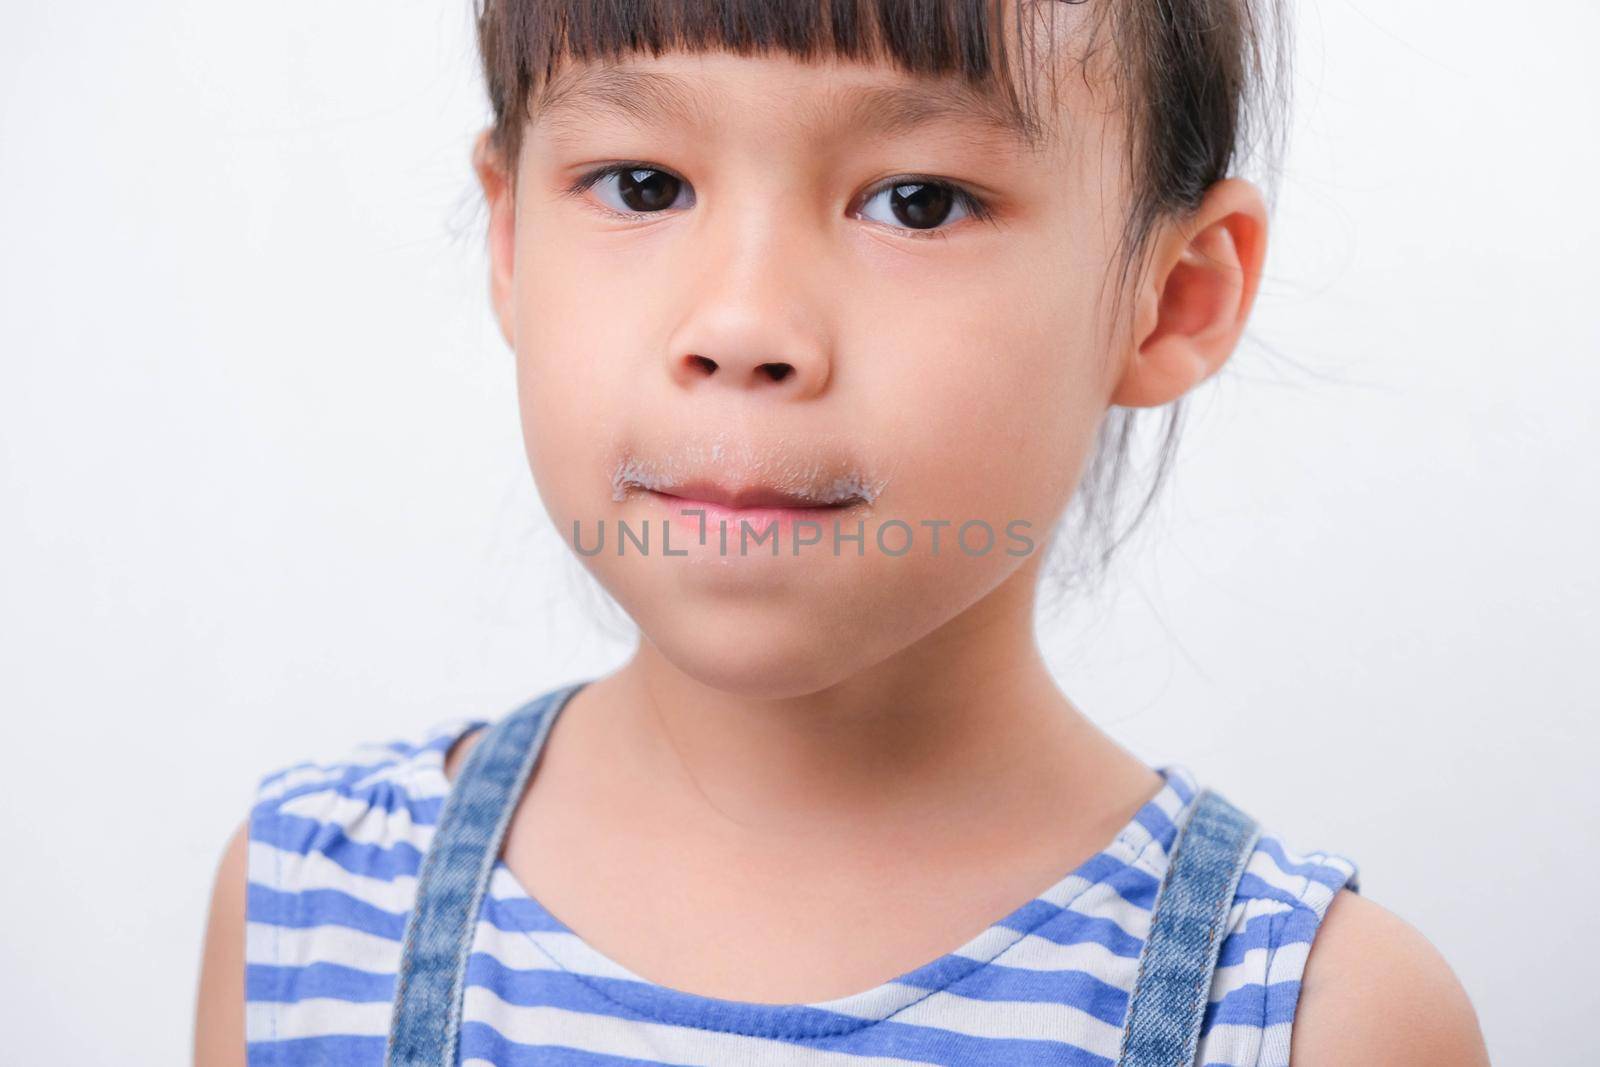 Cute little girl holding a glass of milk and licking her lips on white background. Small girl at home with smiling face, feeling happy enjoying drinking milk and looking at camera.